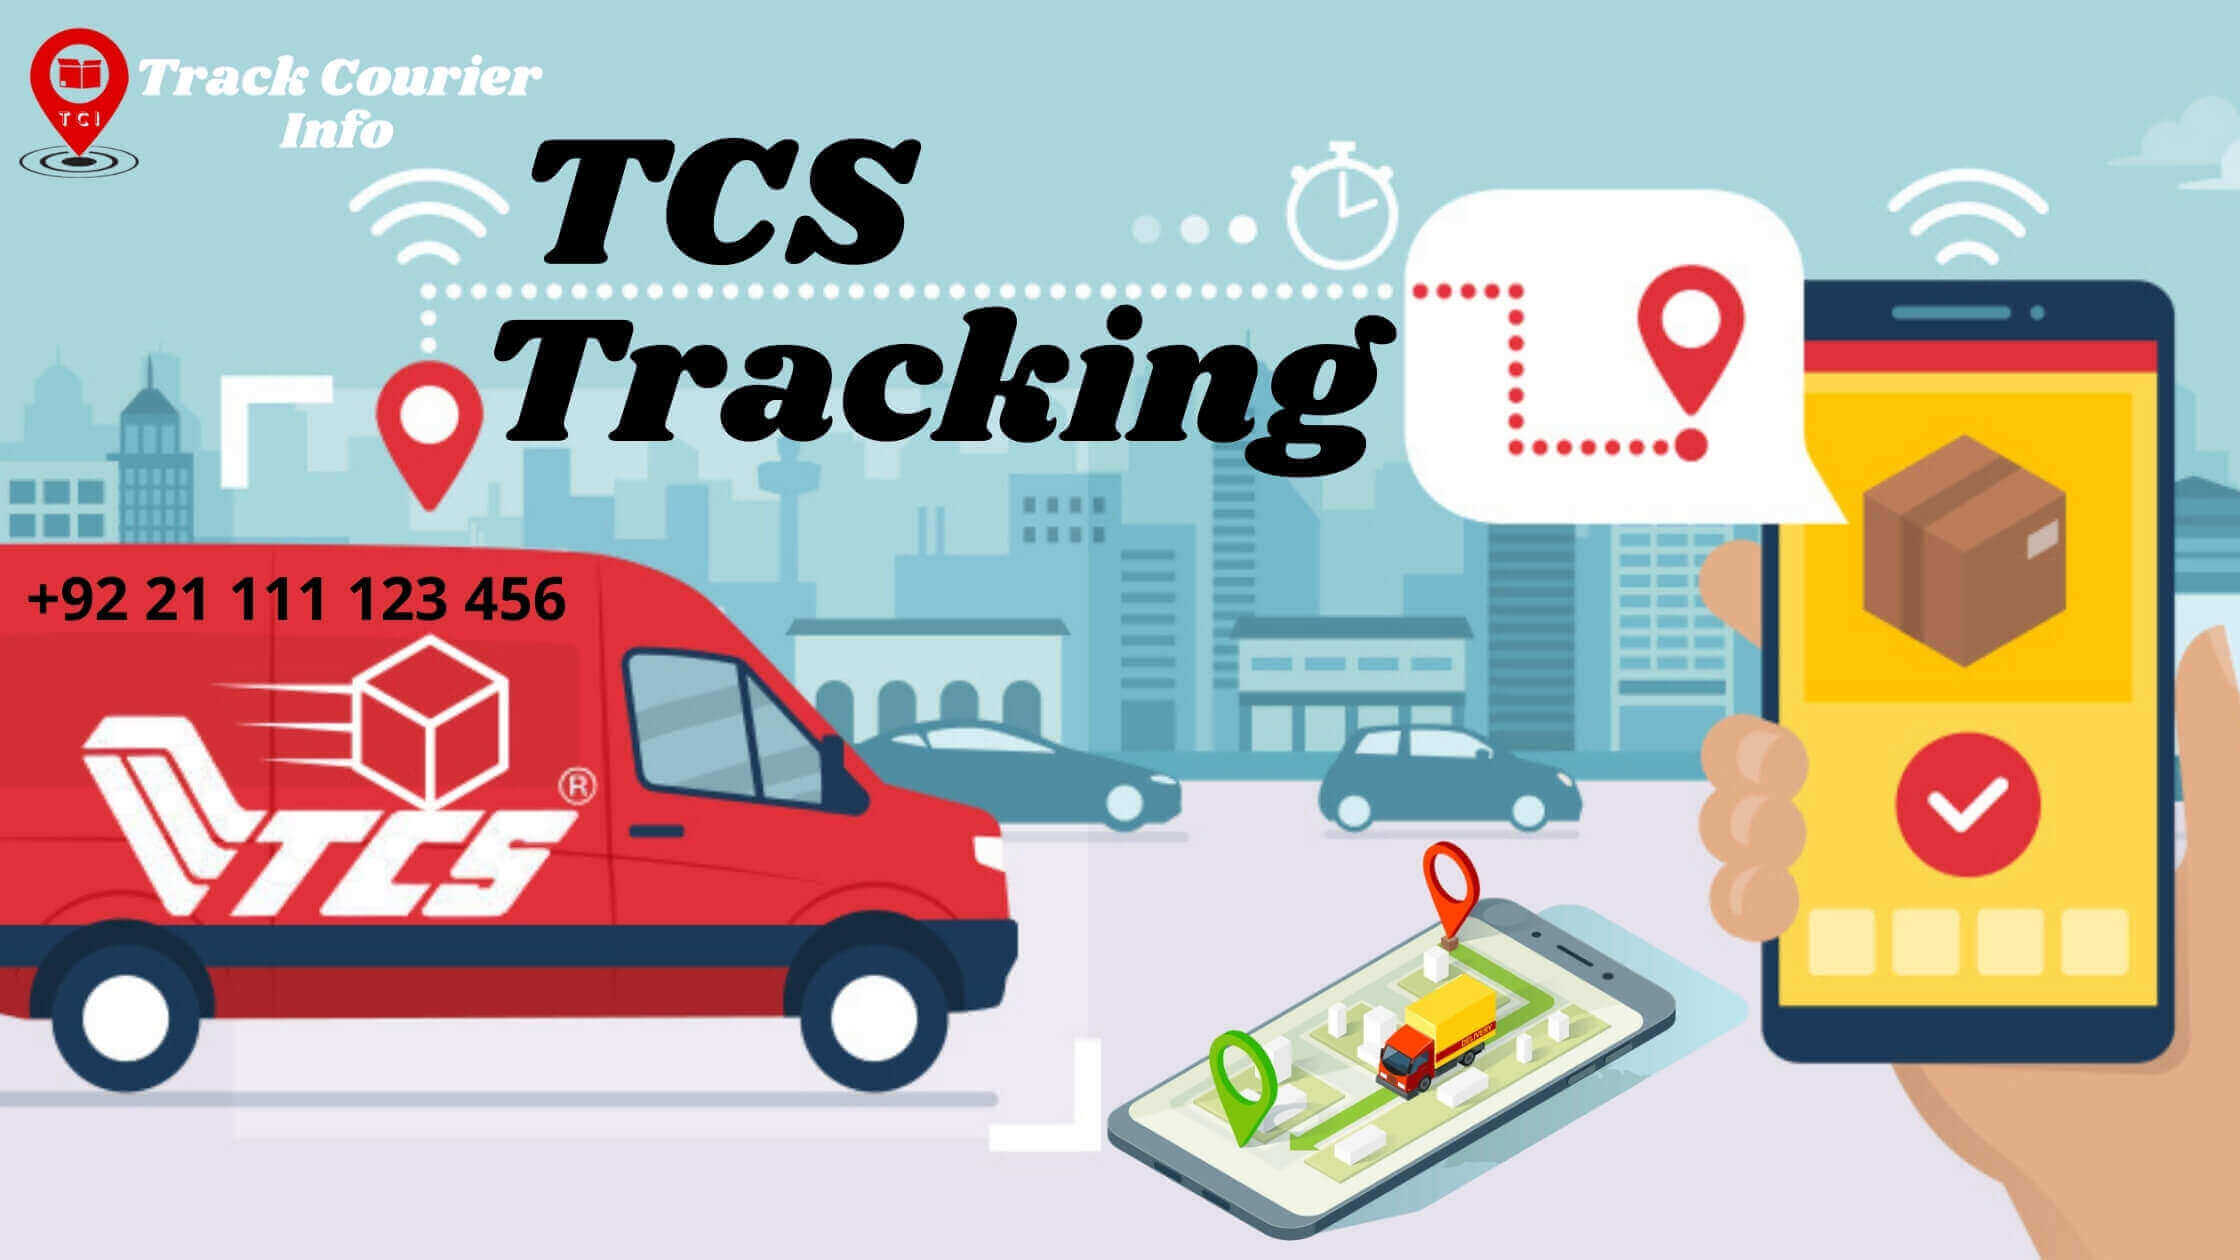 What The Price Of TCS Courier Service In Pakistan